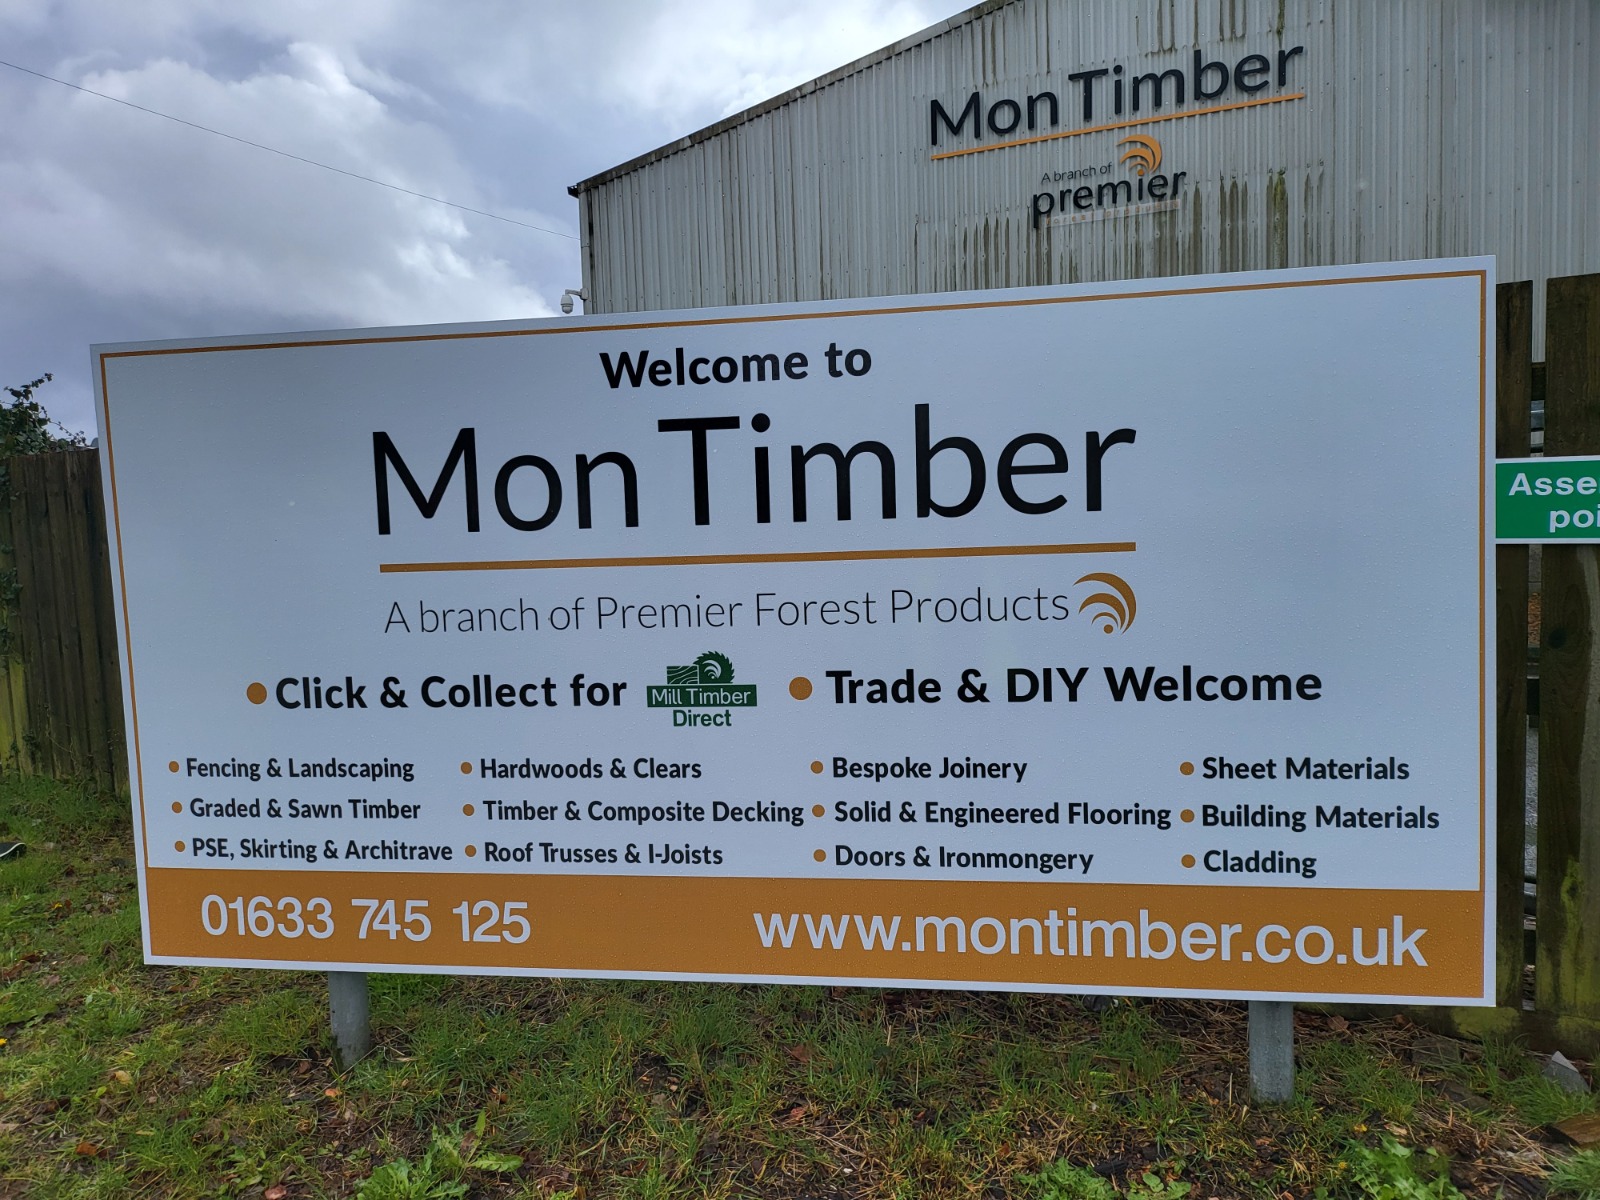 Mon Timber Crumlin & Mill Timber Direct Click & Collect